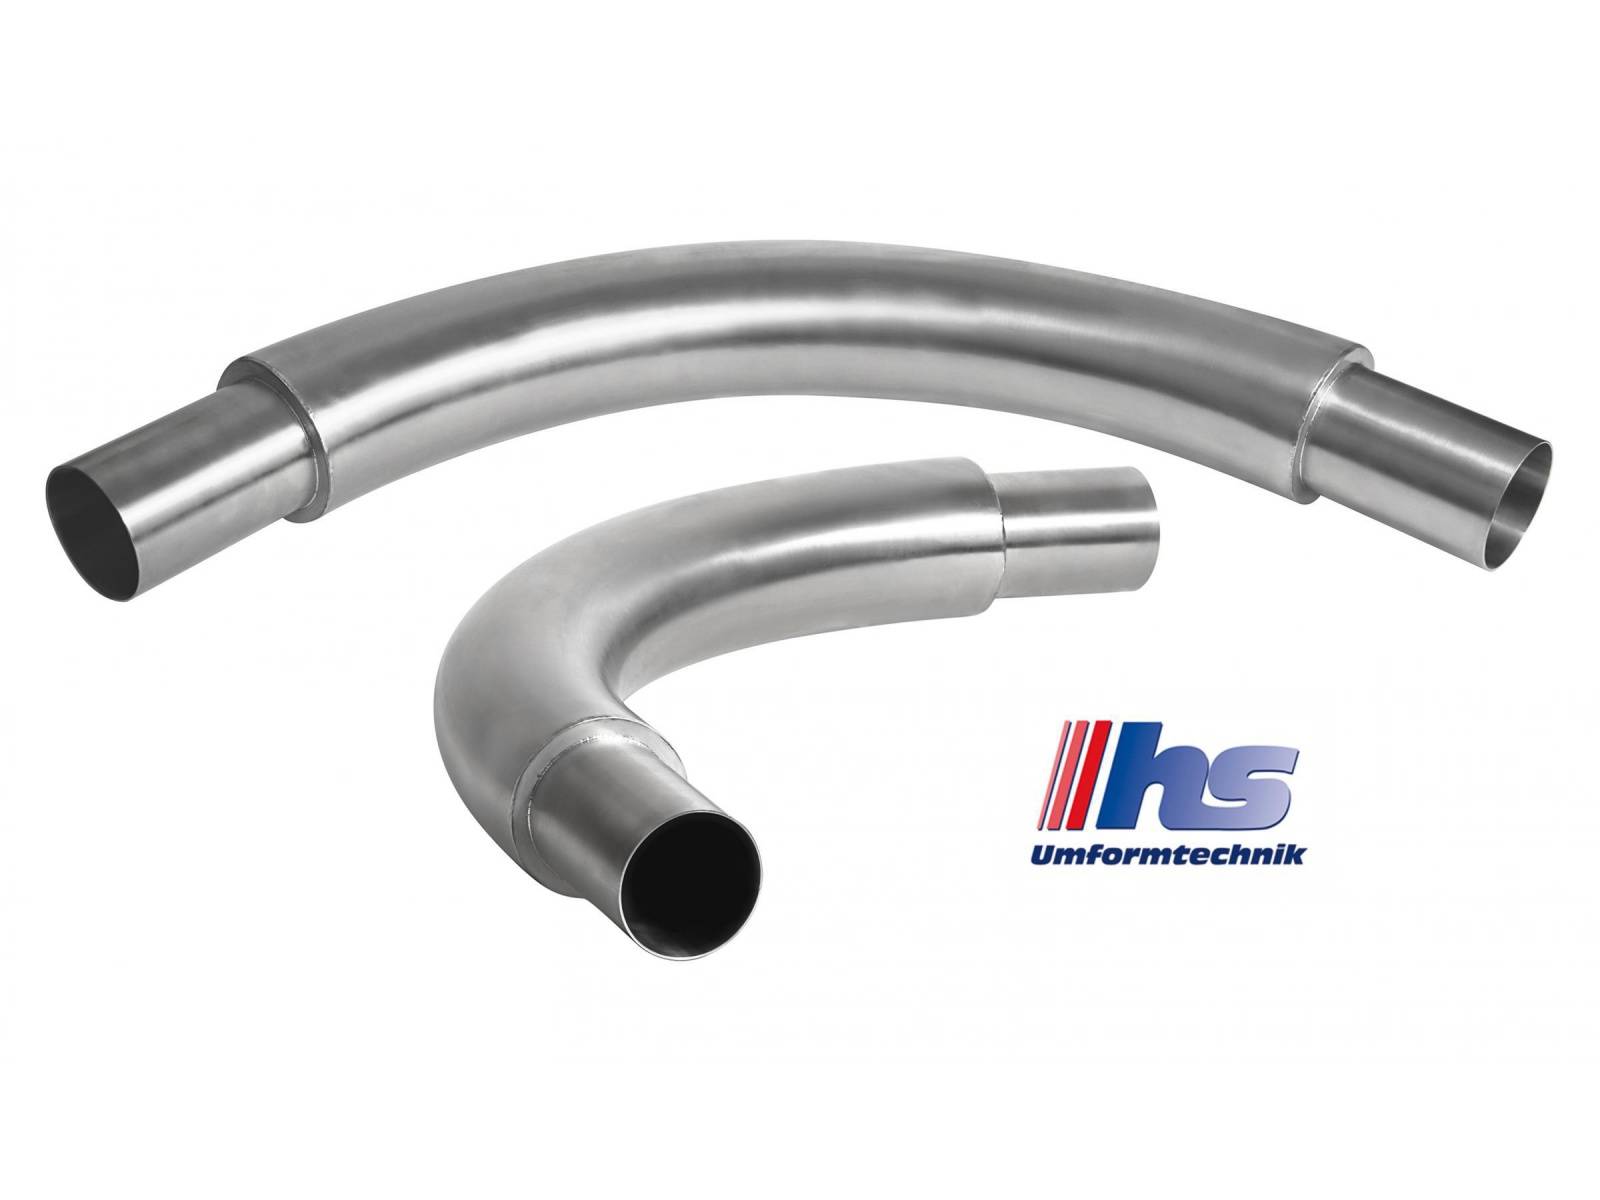 Highly wear-resistant double-skin pipe bends - stainless steel